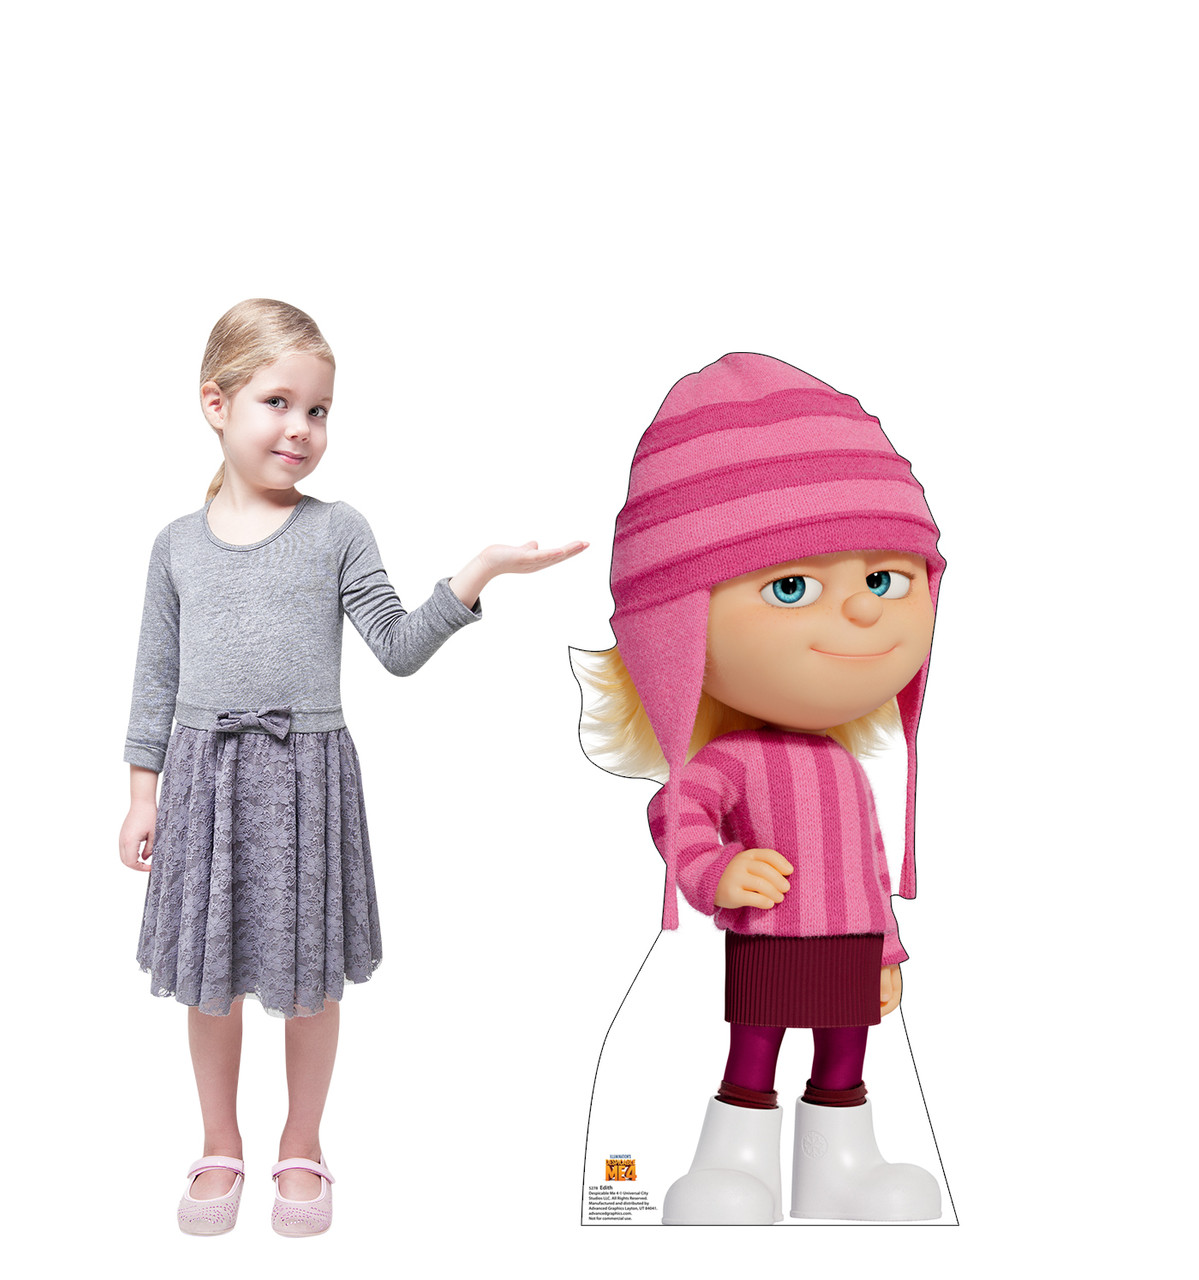 Life-size cardboard standee of Edith with model.